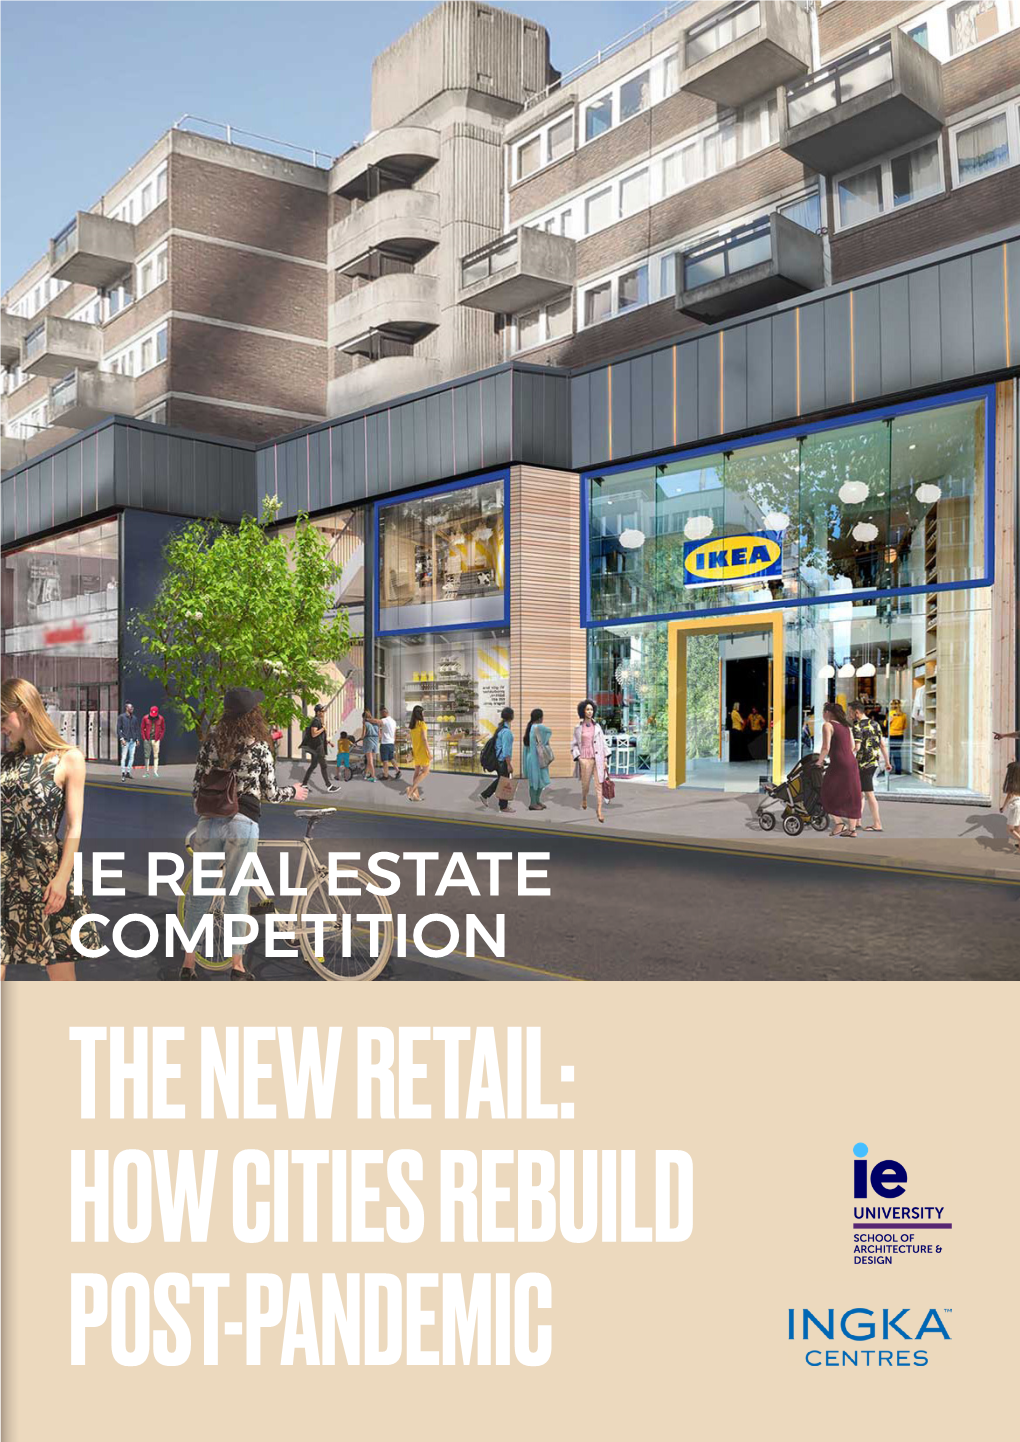 Ie Real Estate Competition the New Retail: How Cities Rebuild Post-Pandemic I